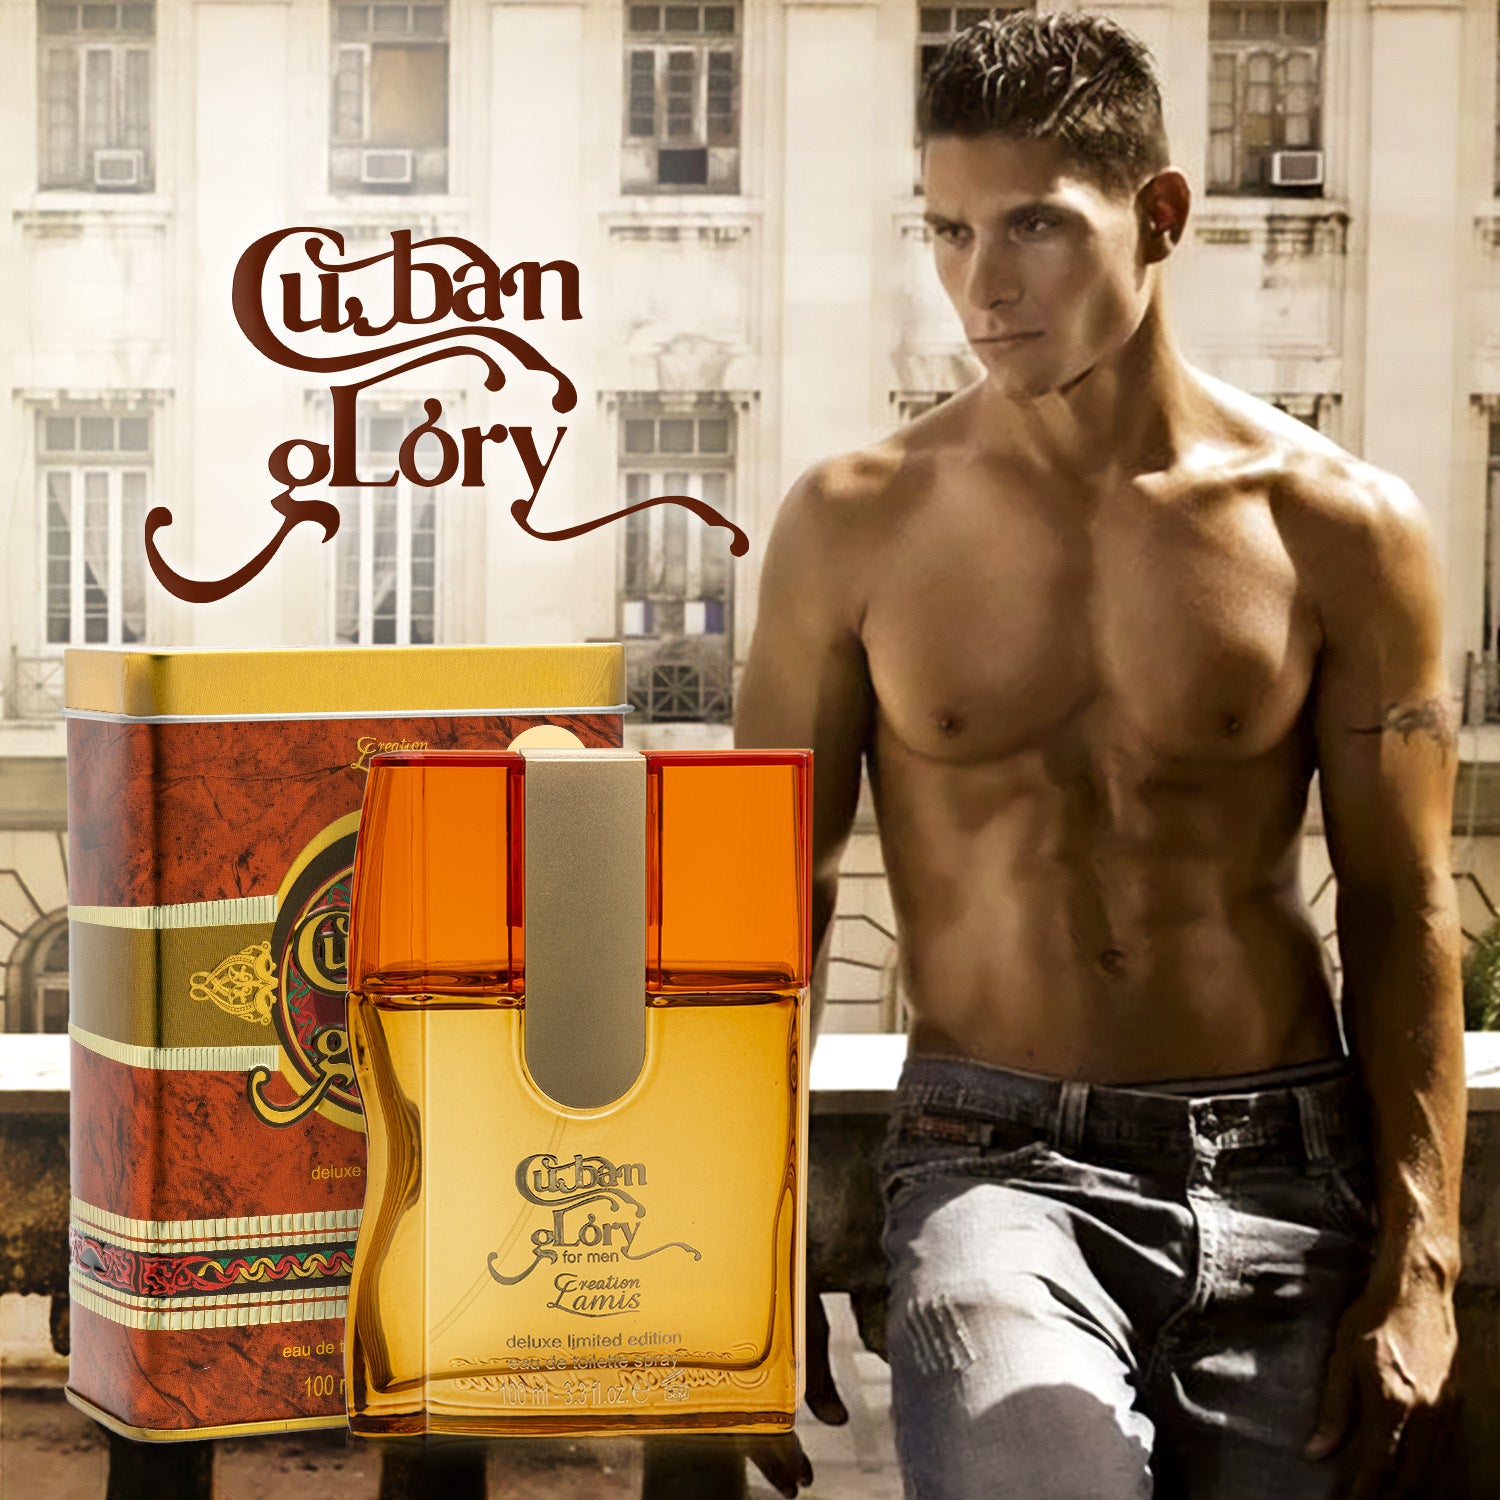 Cuban Glory - Deluxe Edition for Men